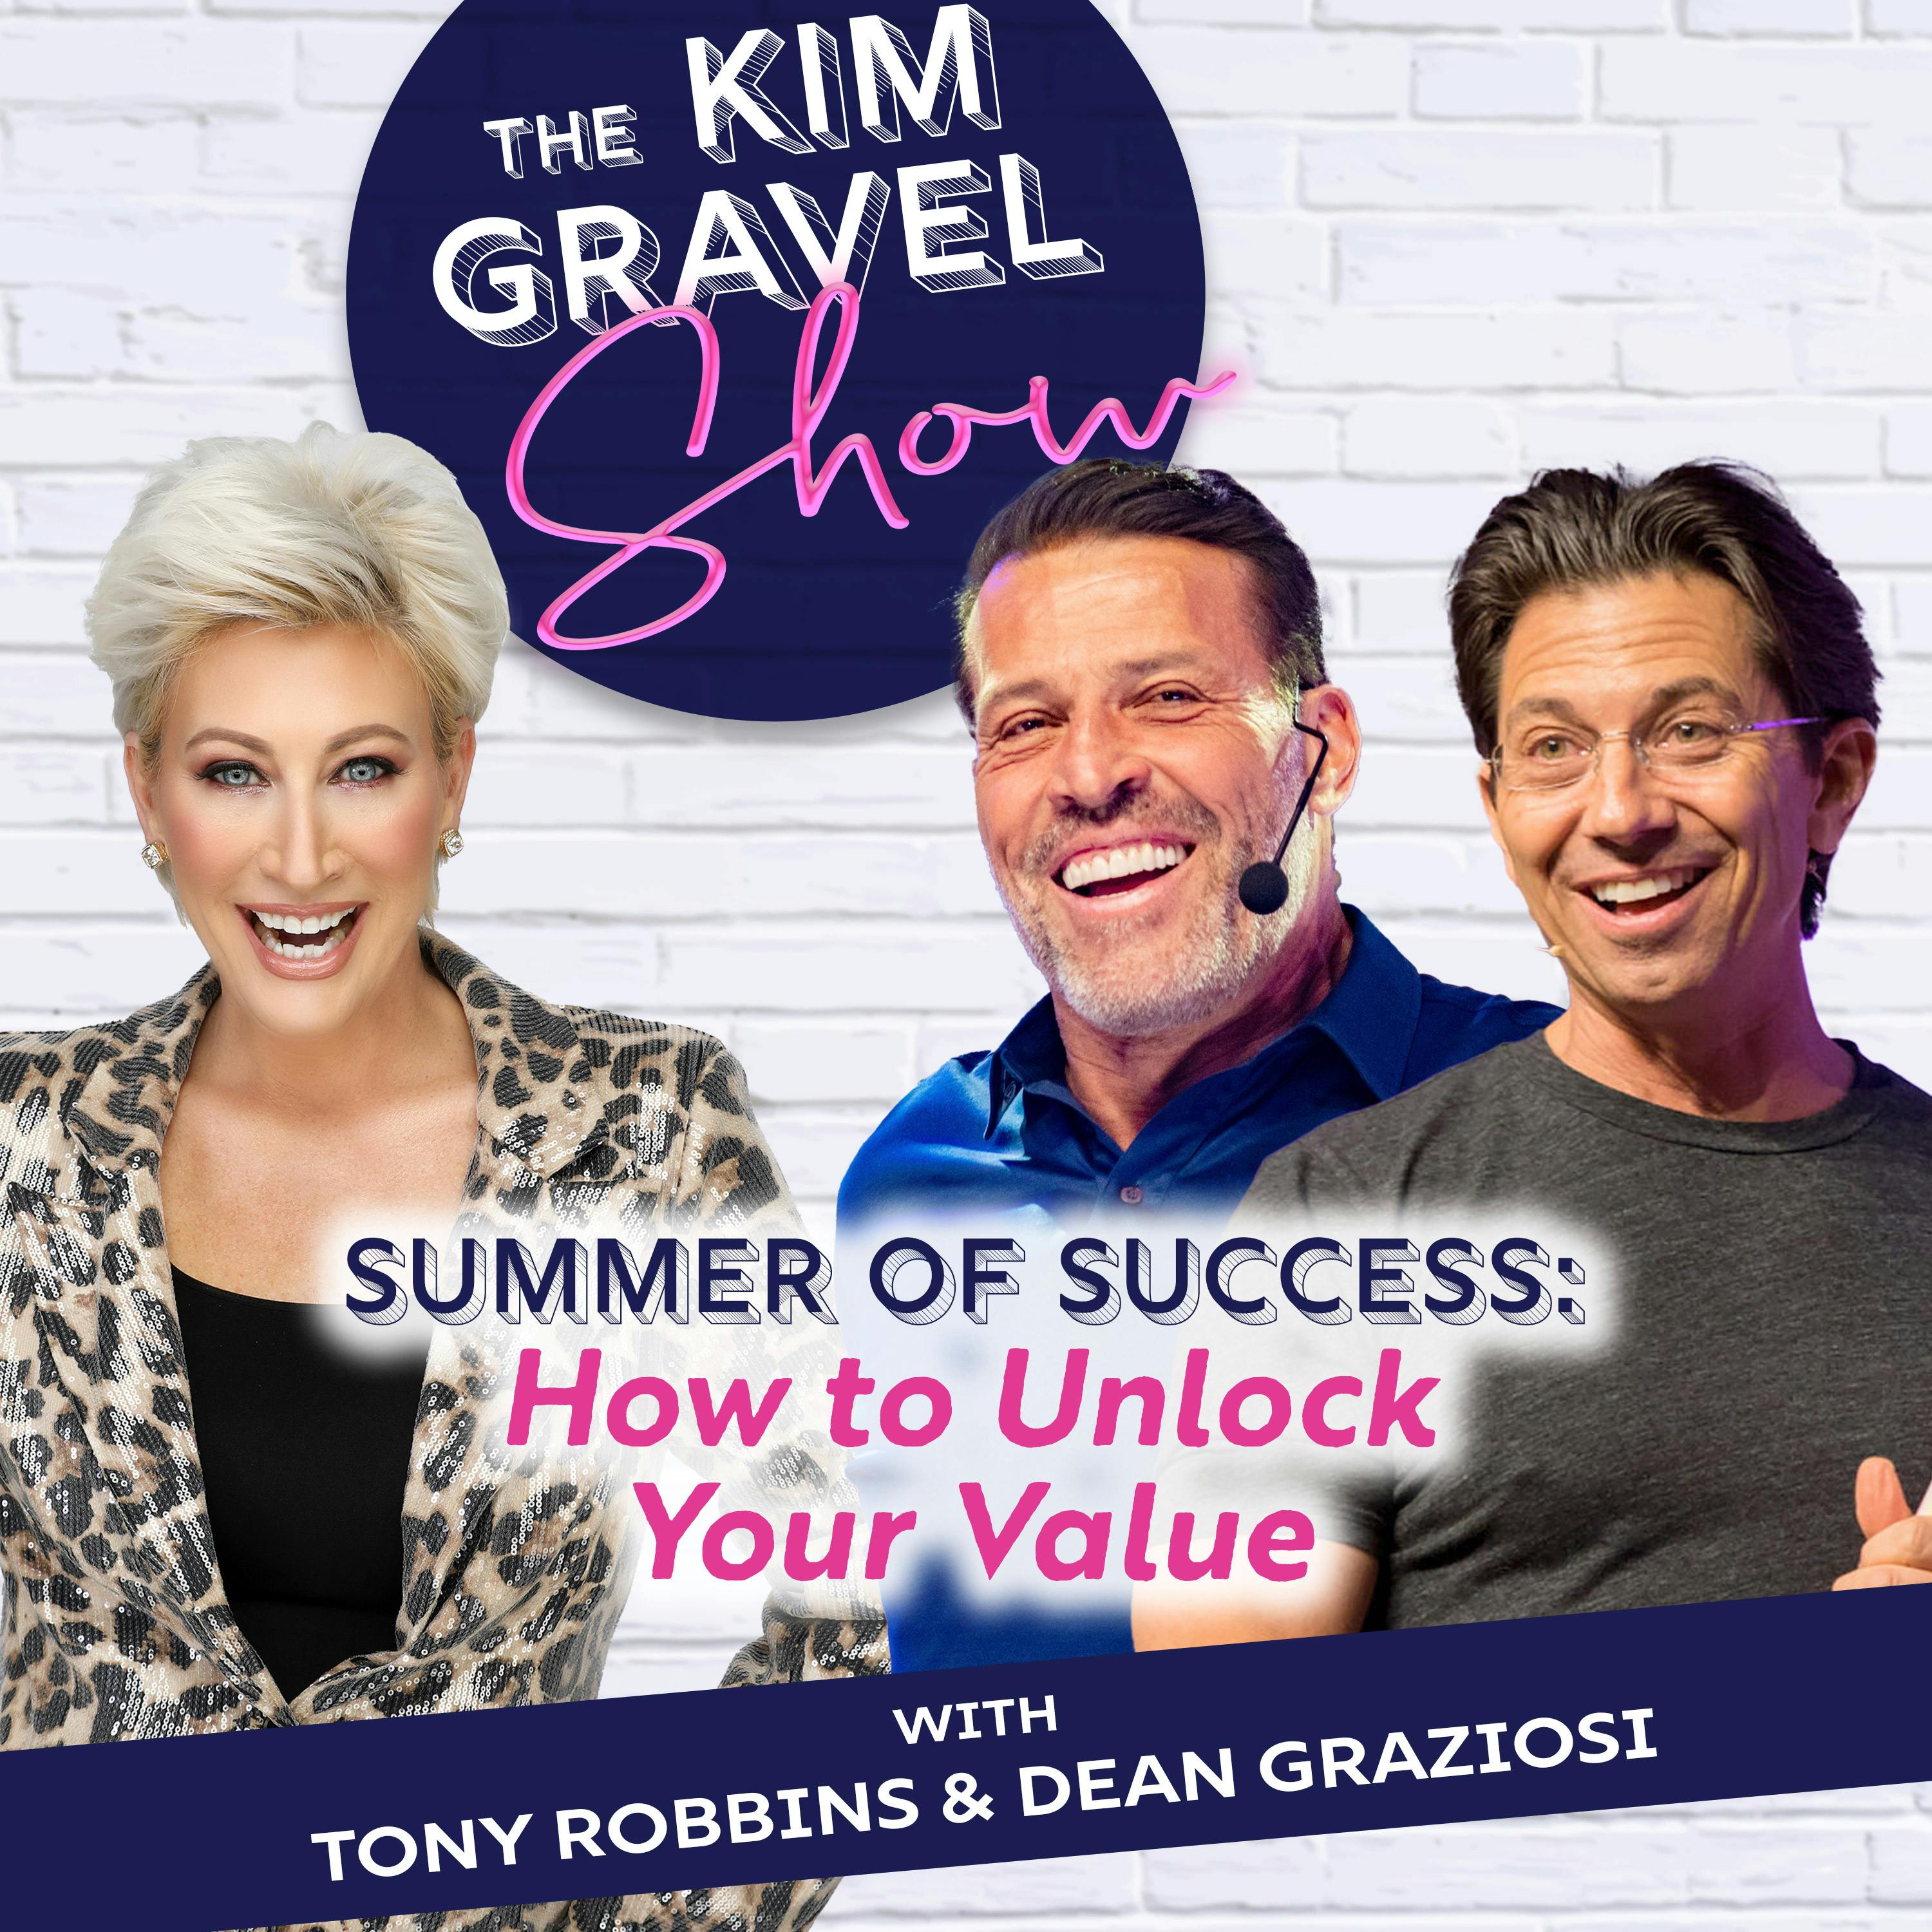 Summer of Success: How to Unlock Your Value with Tony Robbins & Dean Graziosi